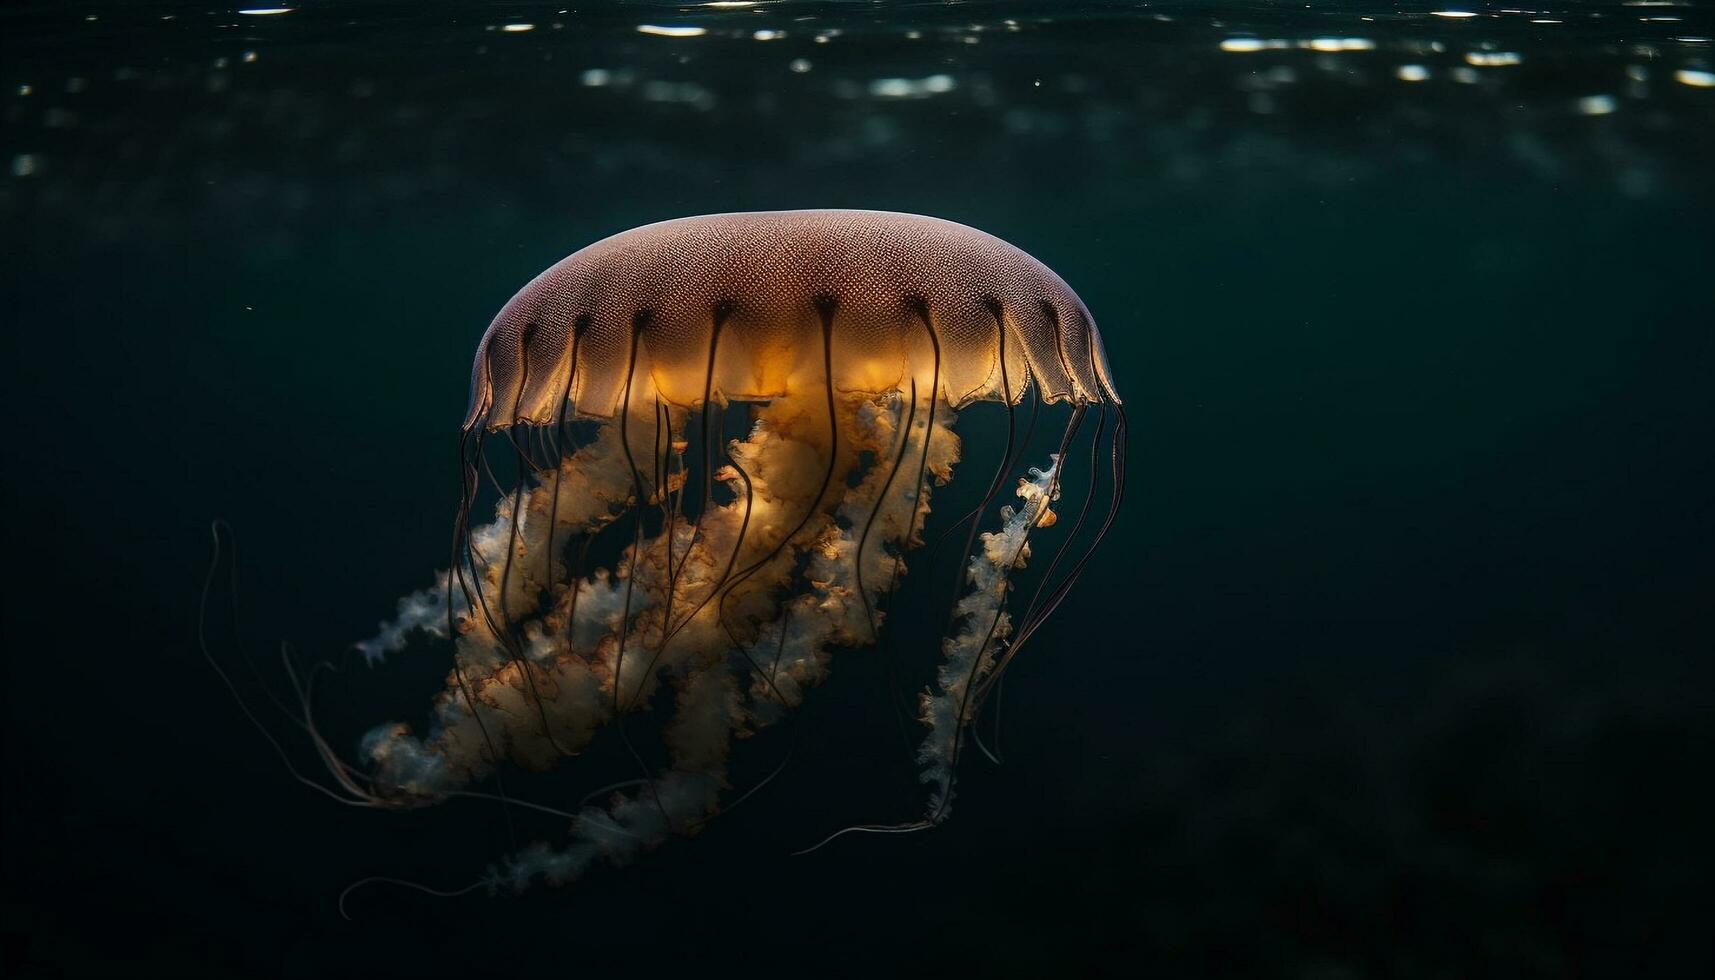 Deep sea diving reveals the beauty and danger of moon jellyfish generated by AI photo